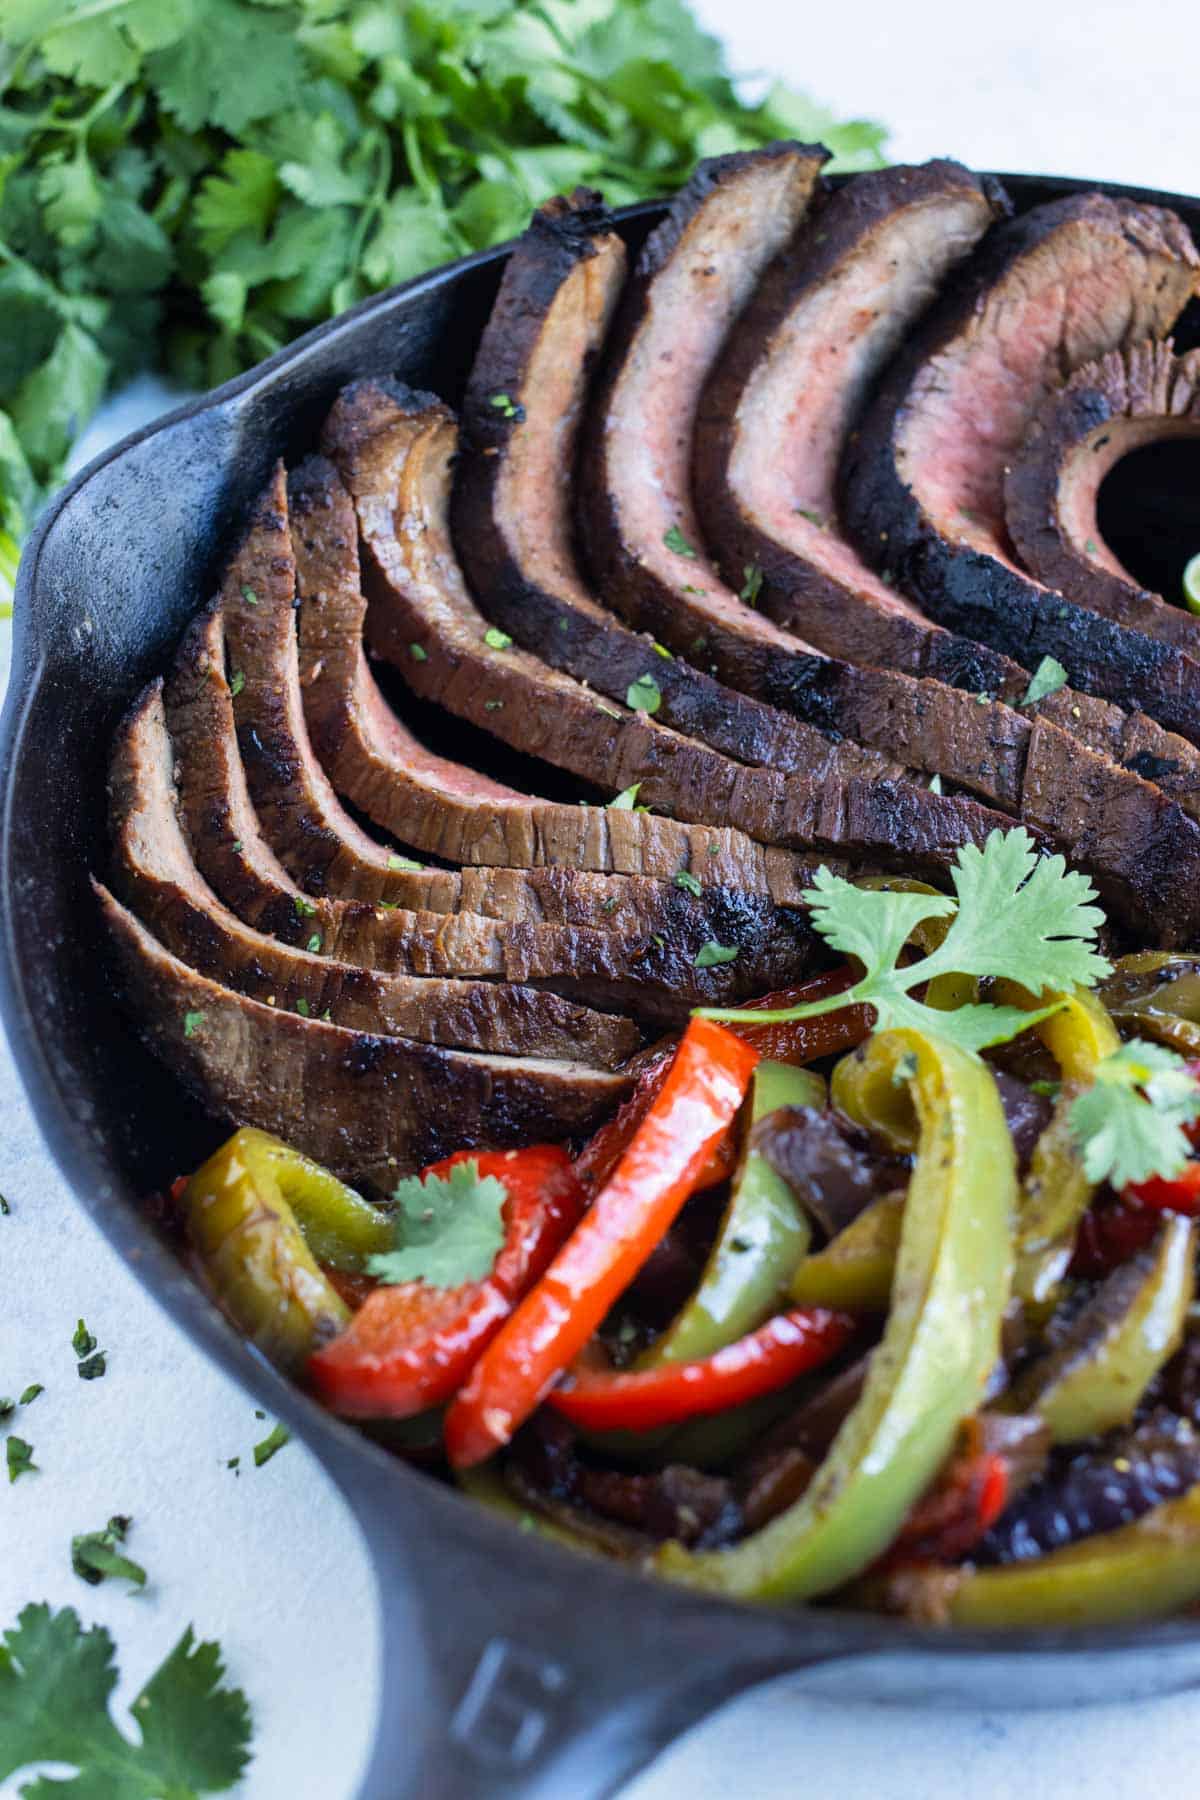 Fajitas are made in a cast iron skillet for a quick meal.